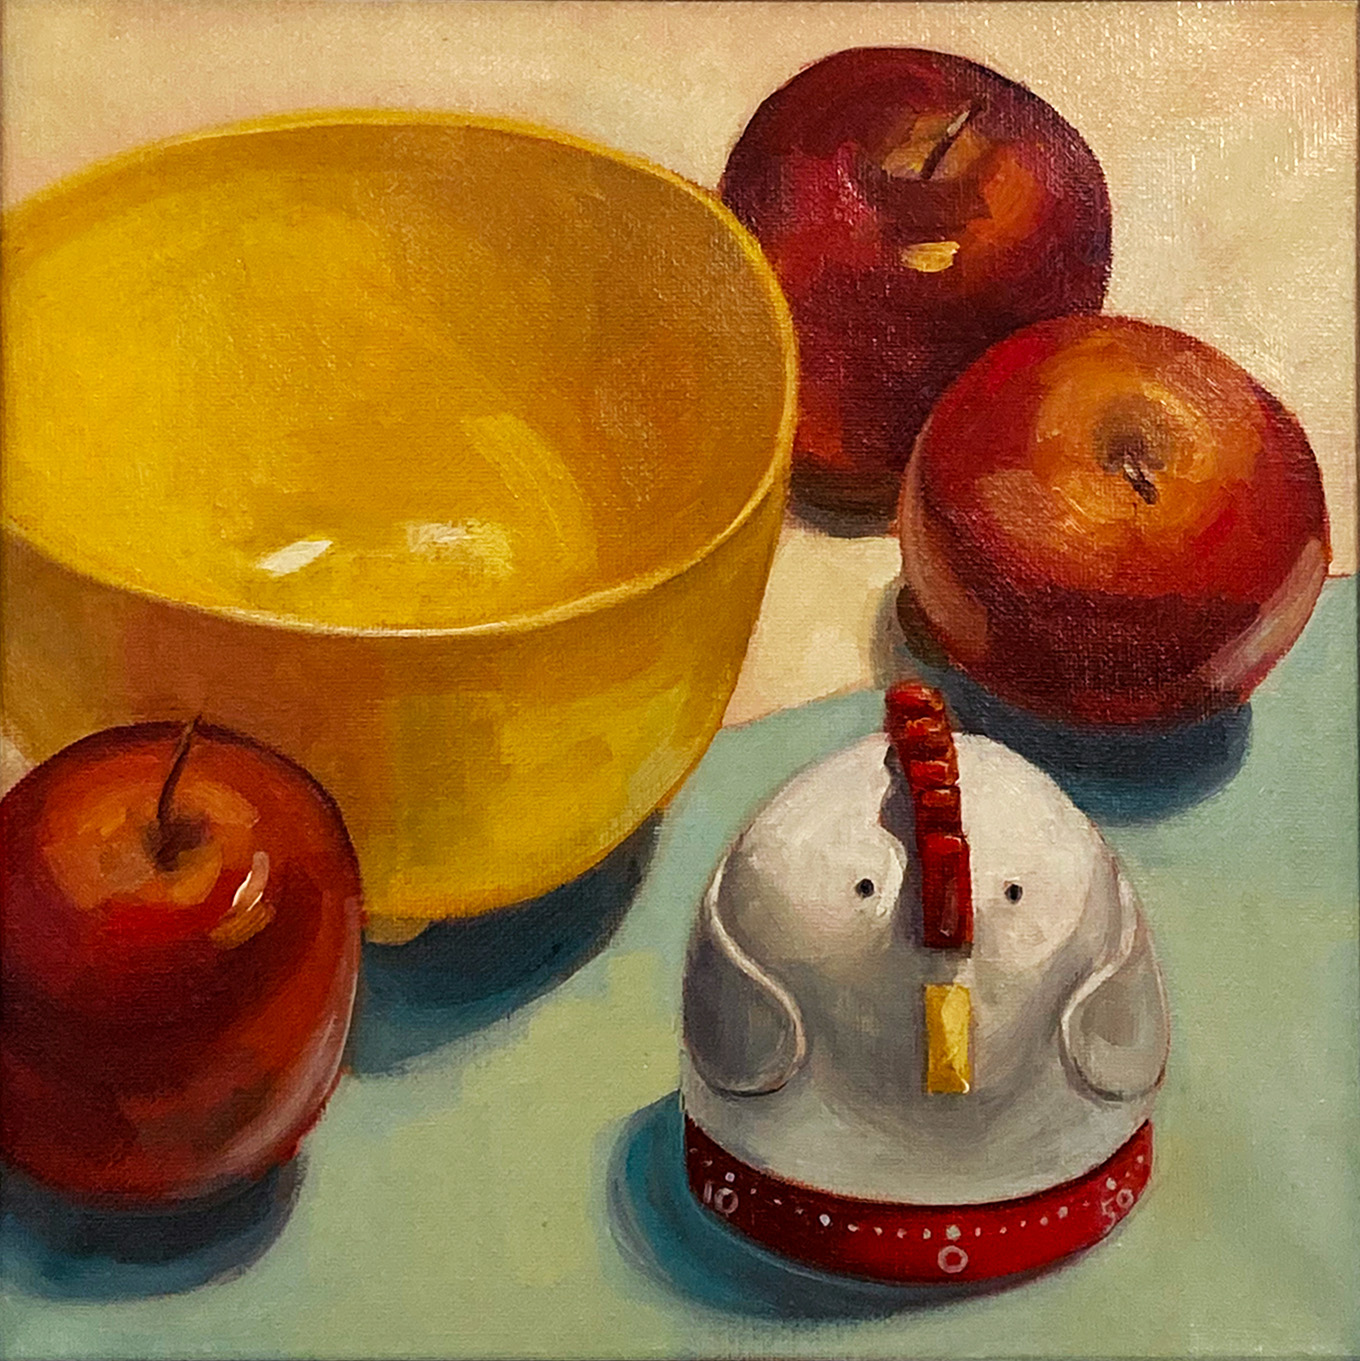 Painting of a chicken egg timer, three apples and a yellow bowl.